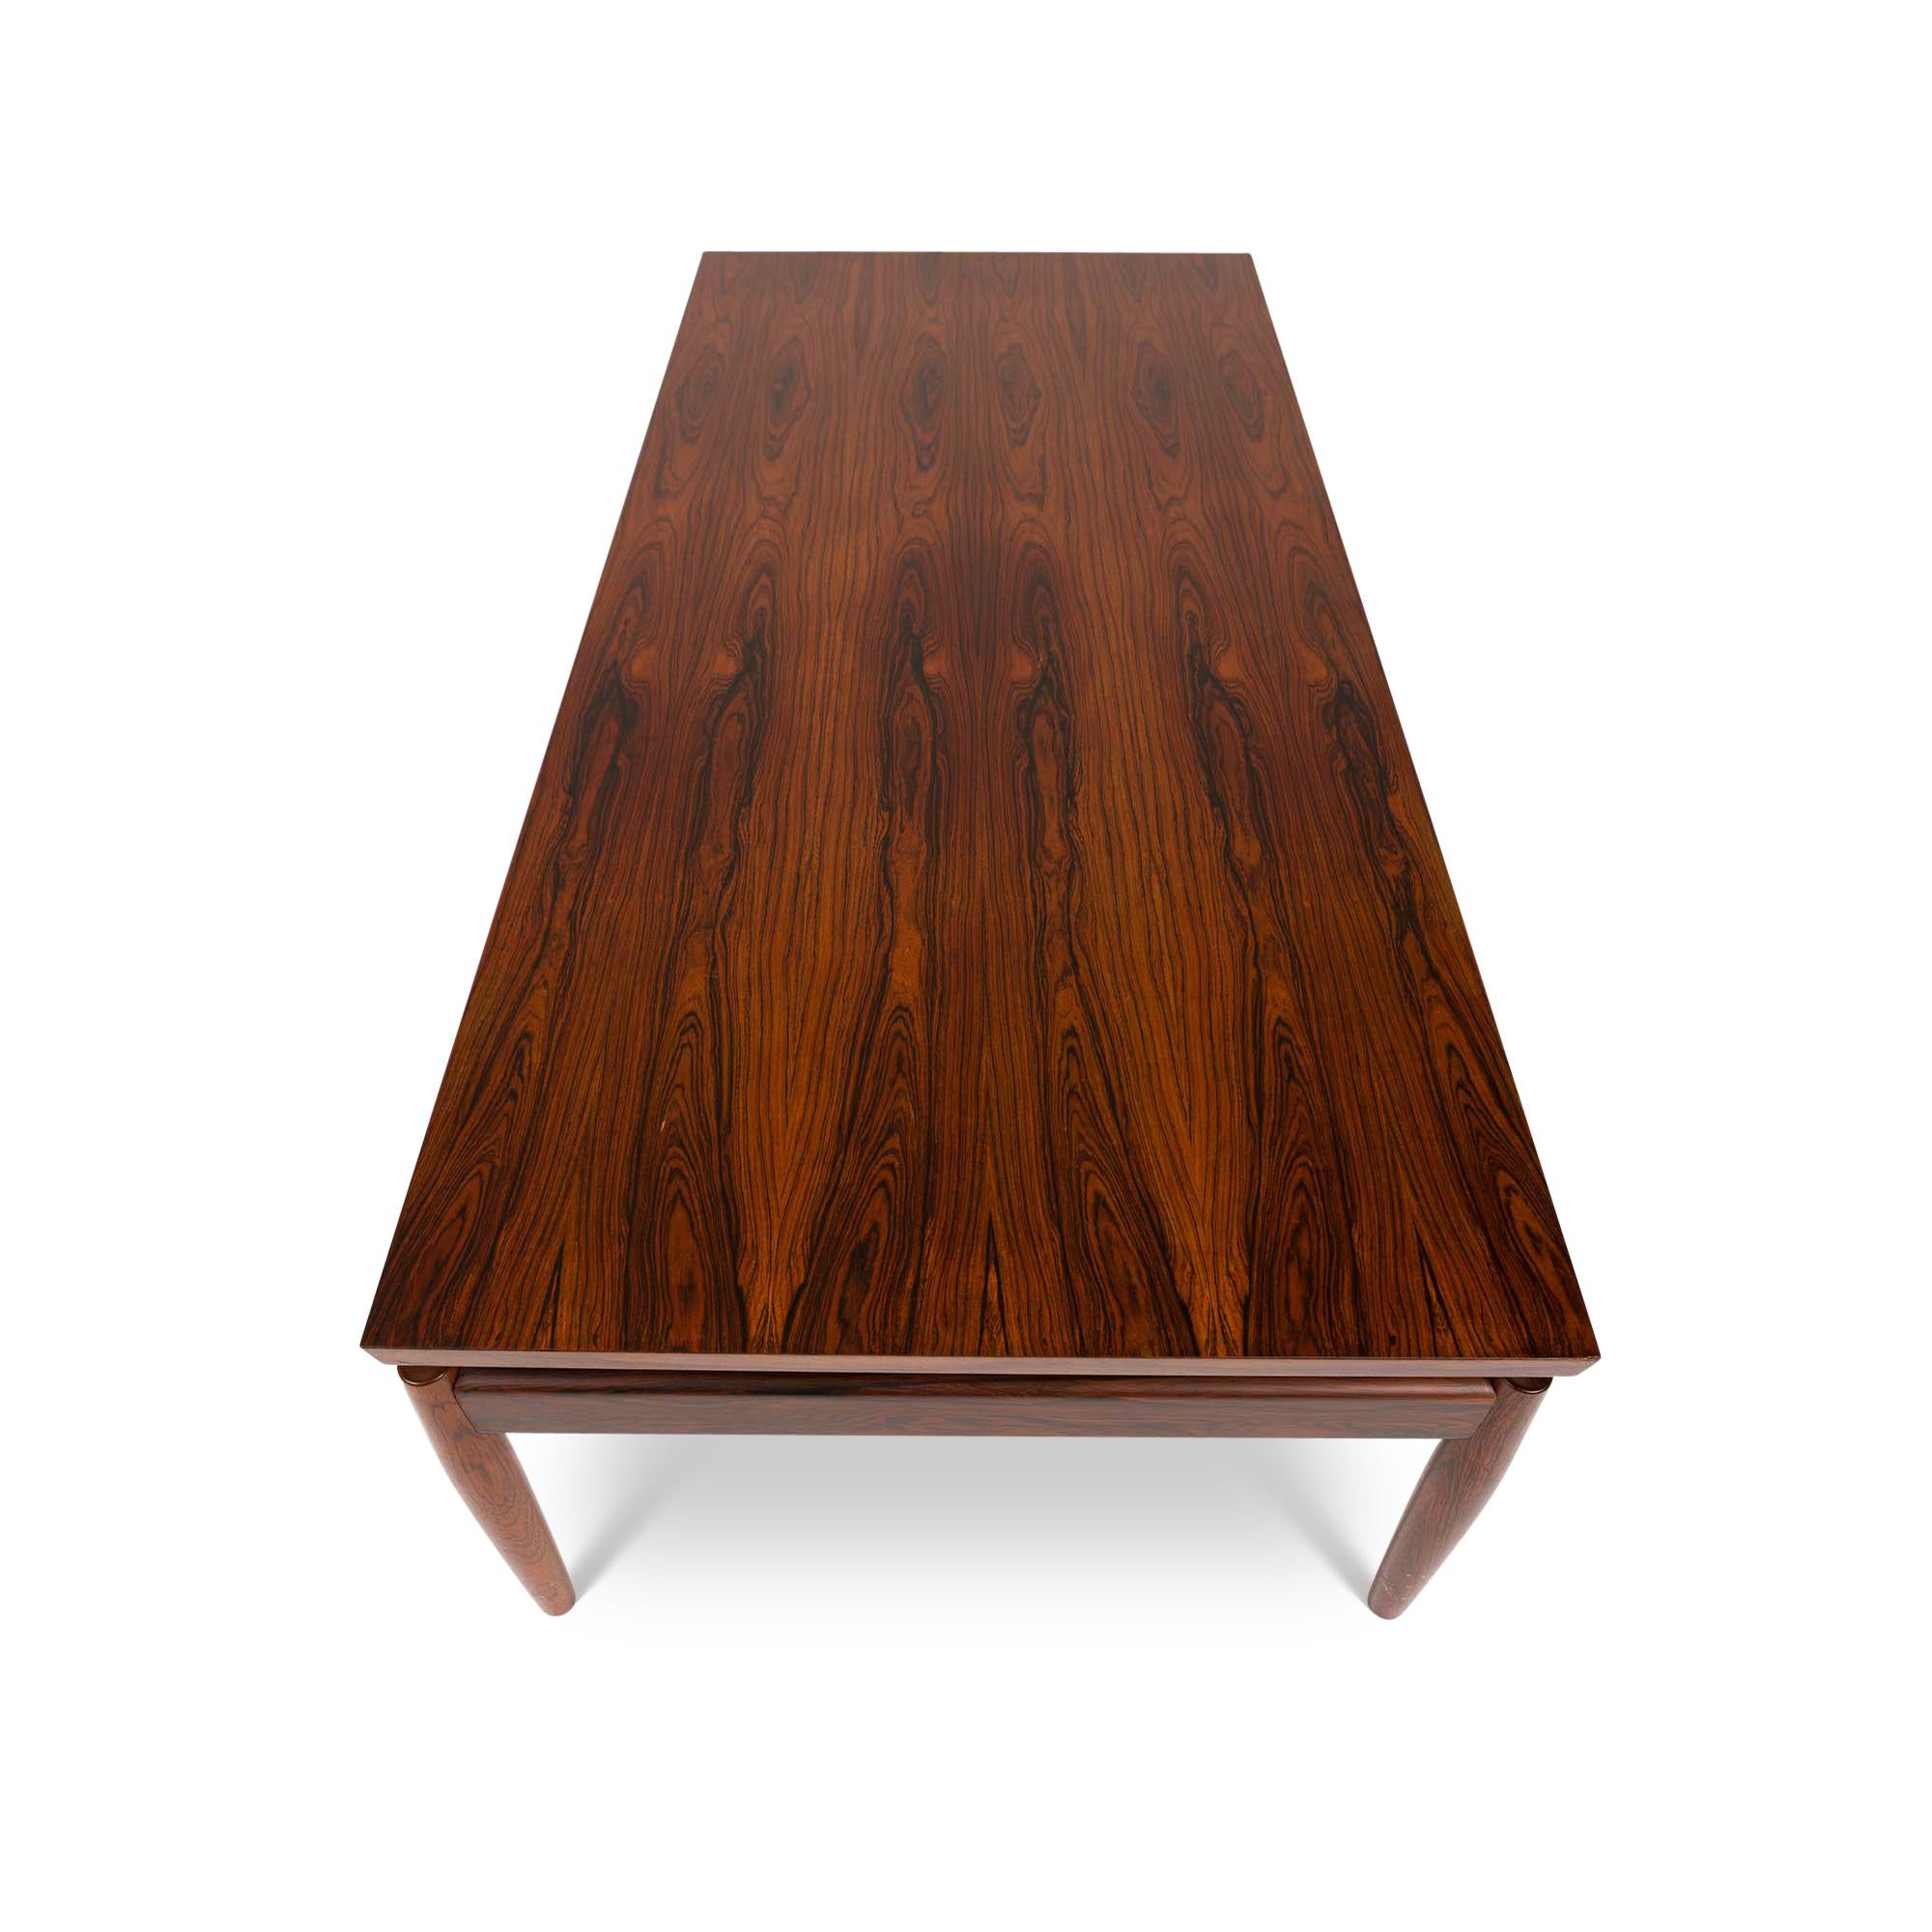 Danish Vintage Rosewood Floating Top Coffee Table by Grete Jalk for France & Søn Denmar For Sale